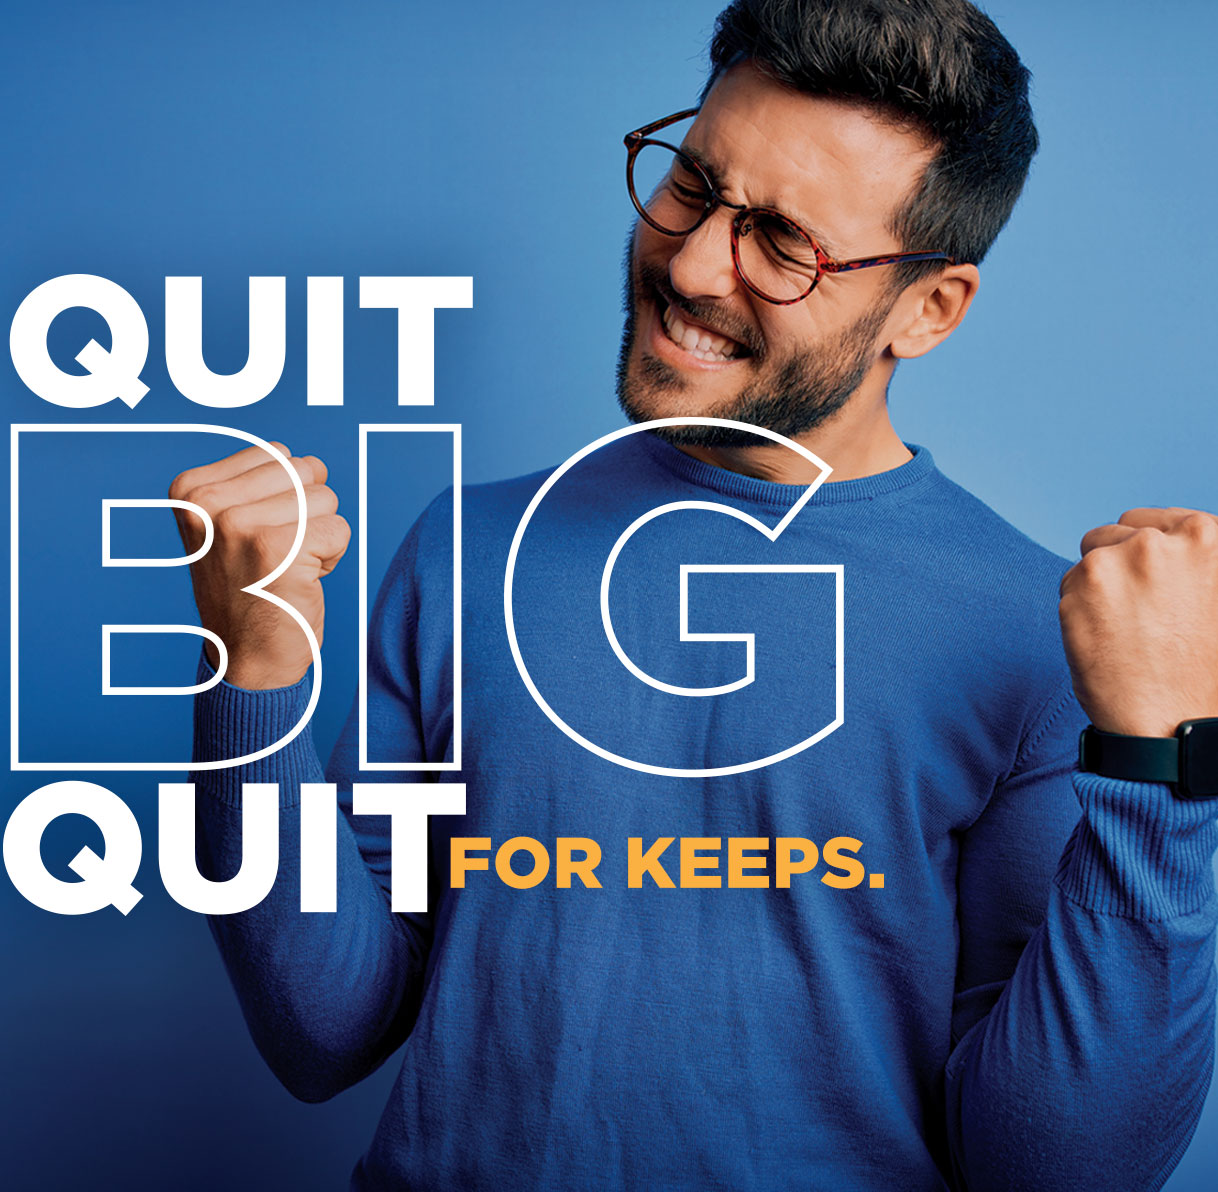 A man celebrating with arms in the air. Graphic overlay that says "Quit Big. Quit for Keeps."